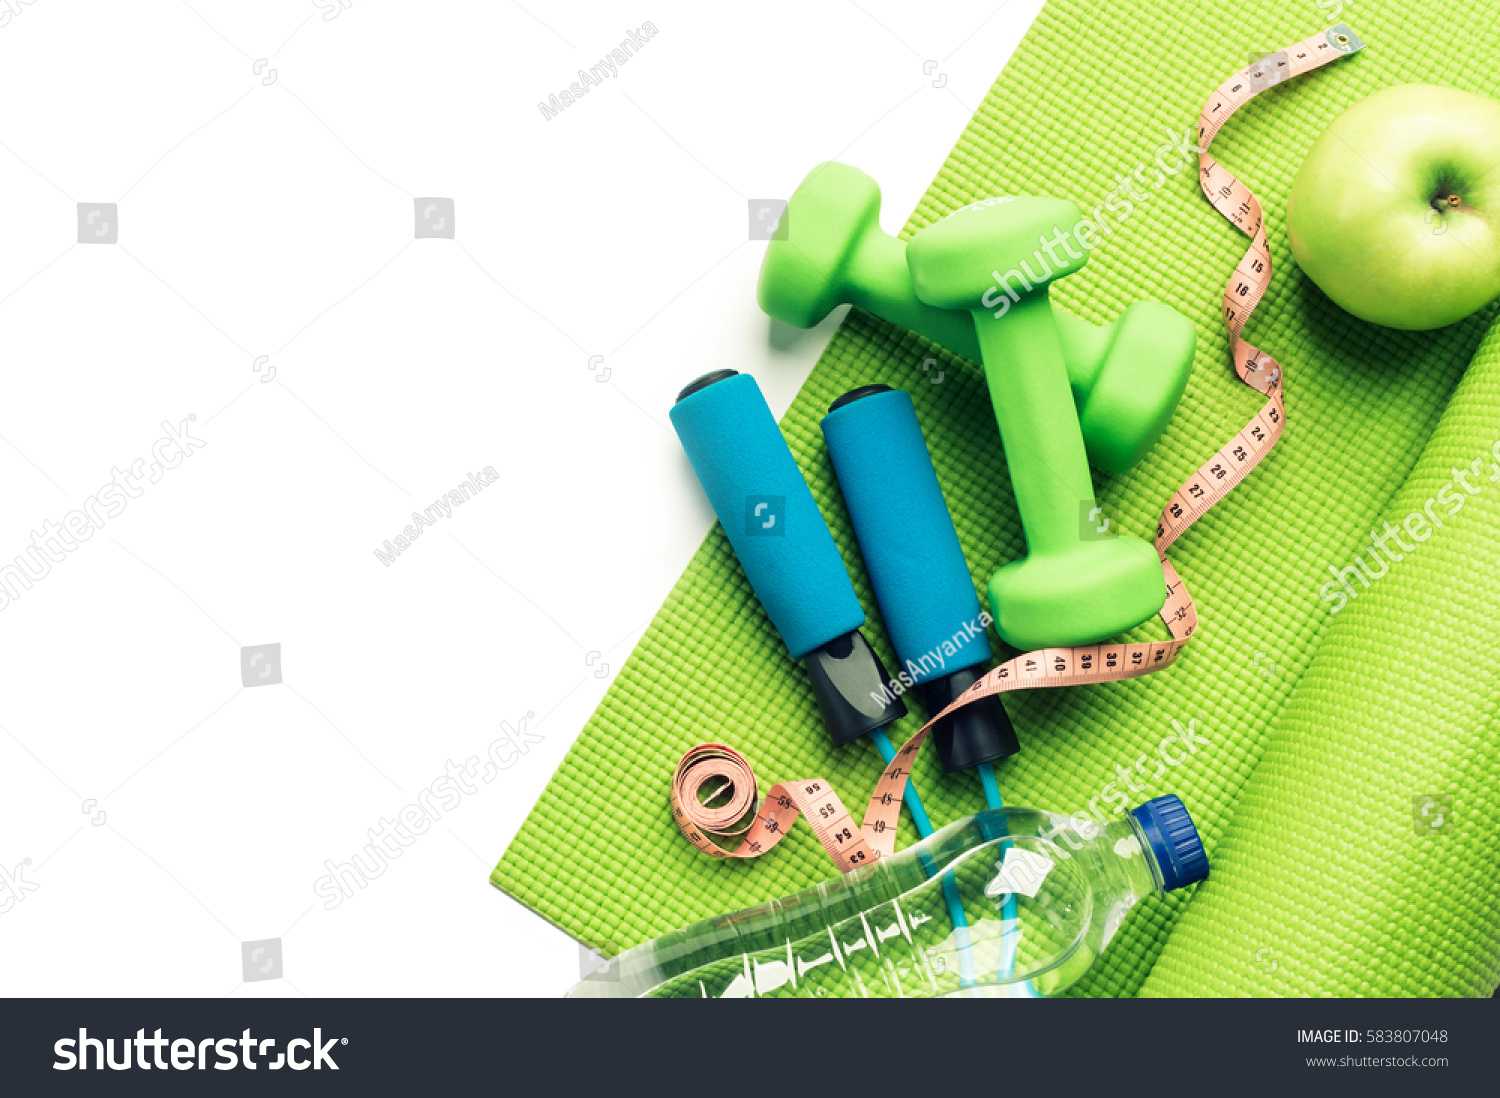 Fitness concept - yoga mat, apple, dumbbells and skipping rope on the white background #583807048